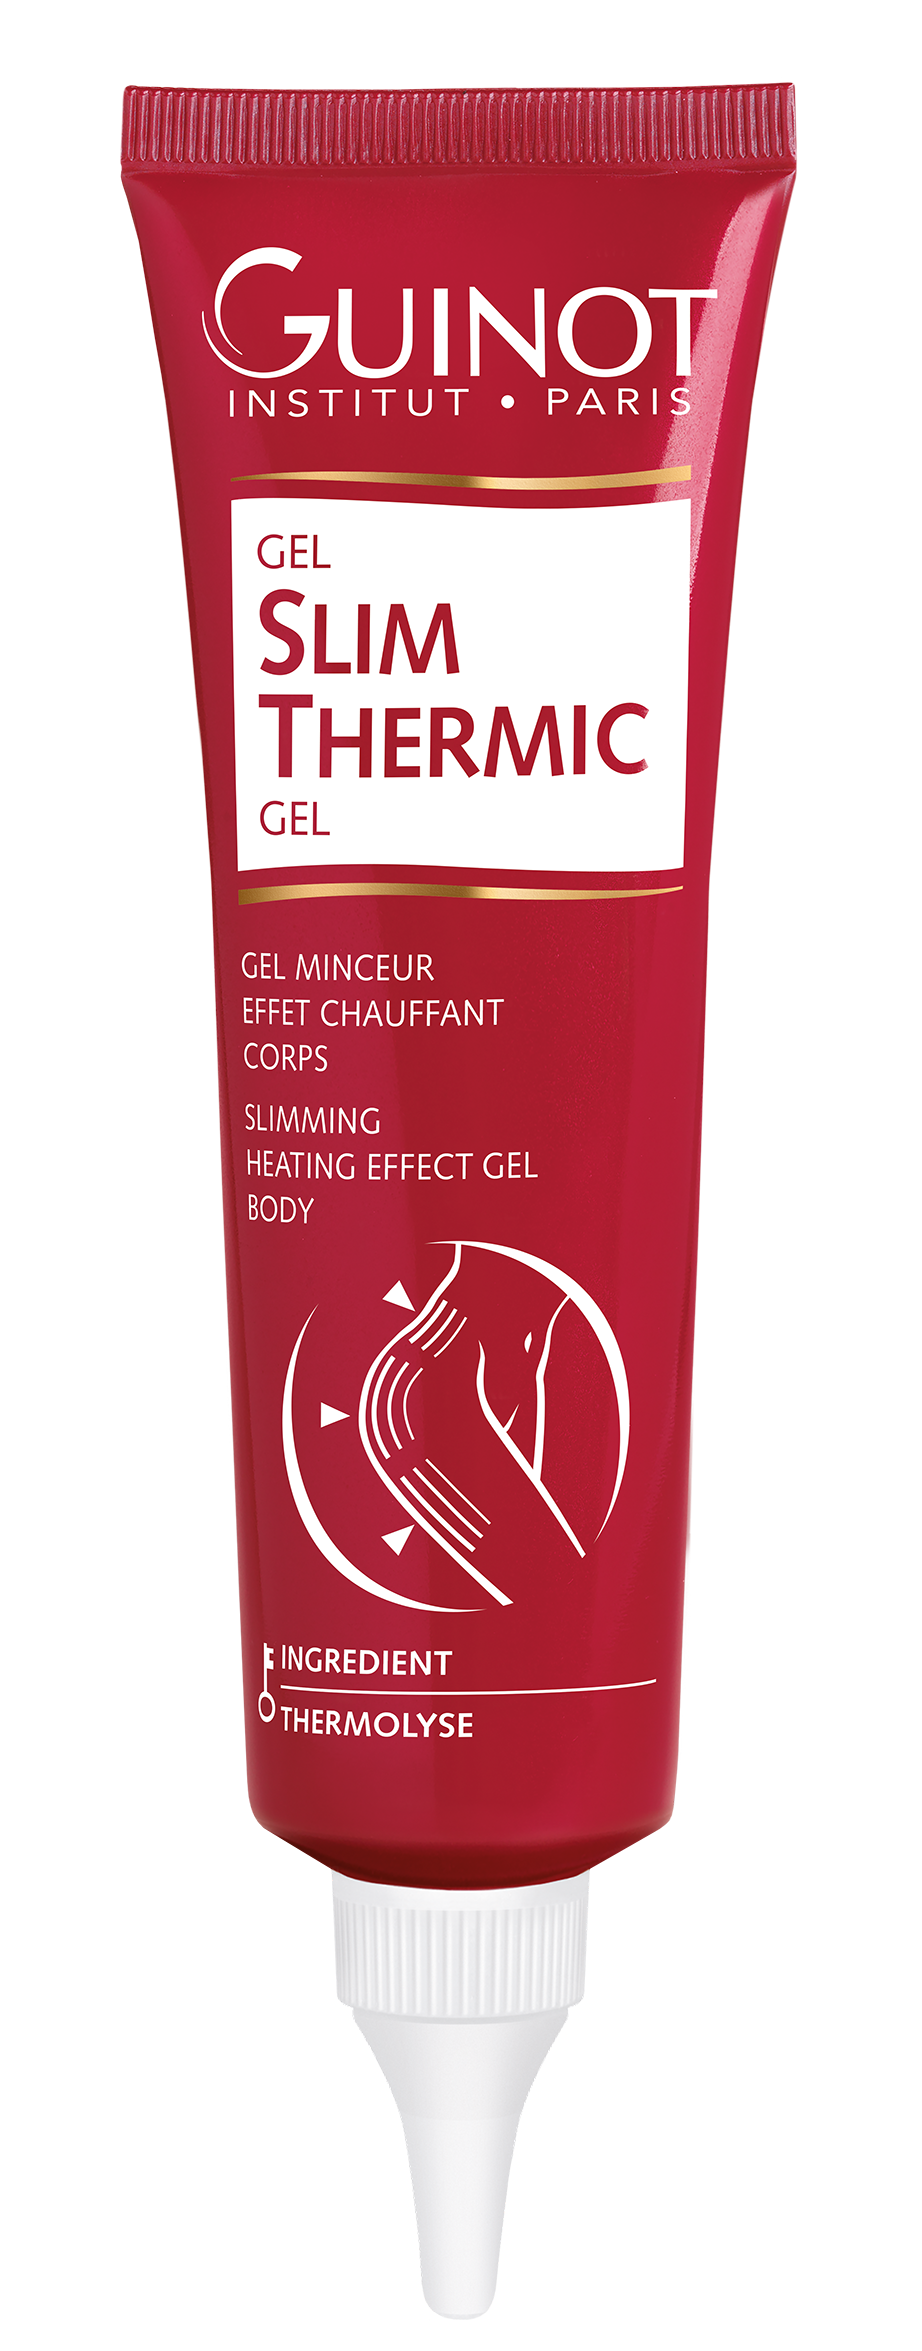 SLIM THERMIC heat-activated GEL 125ml